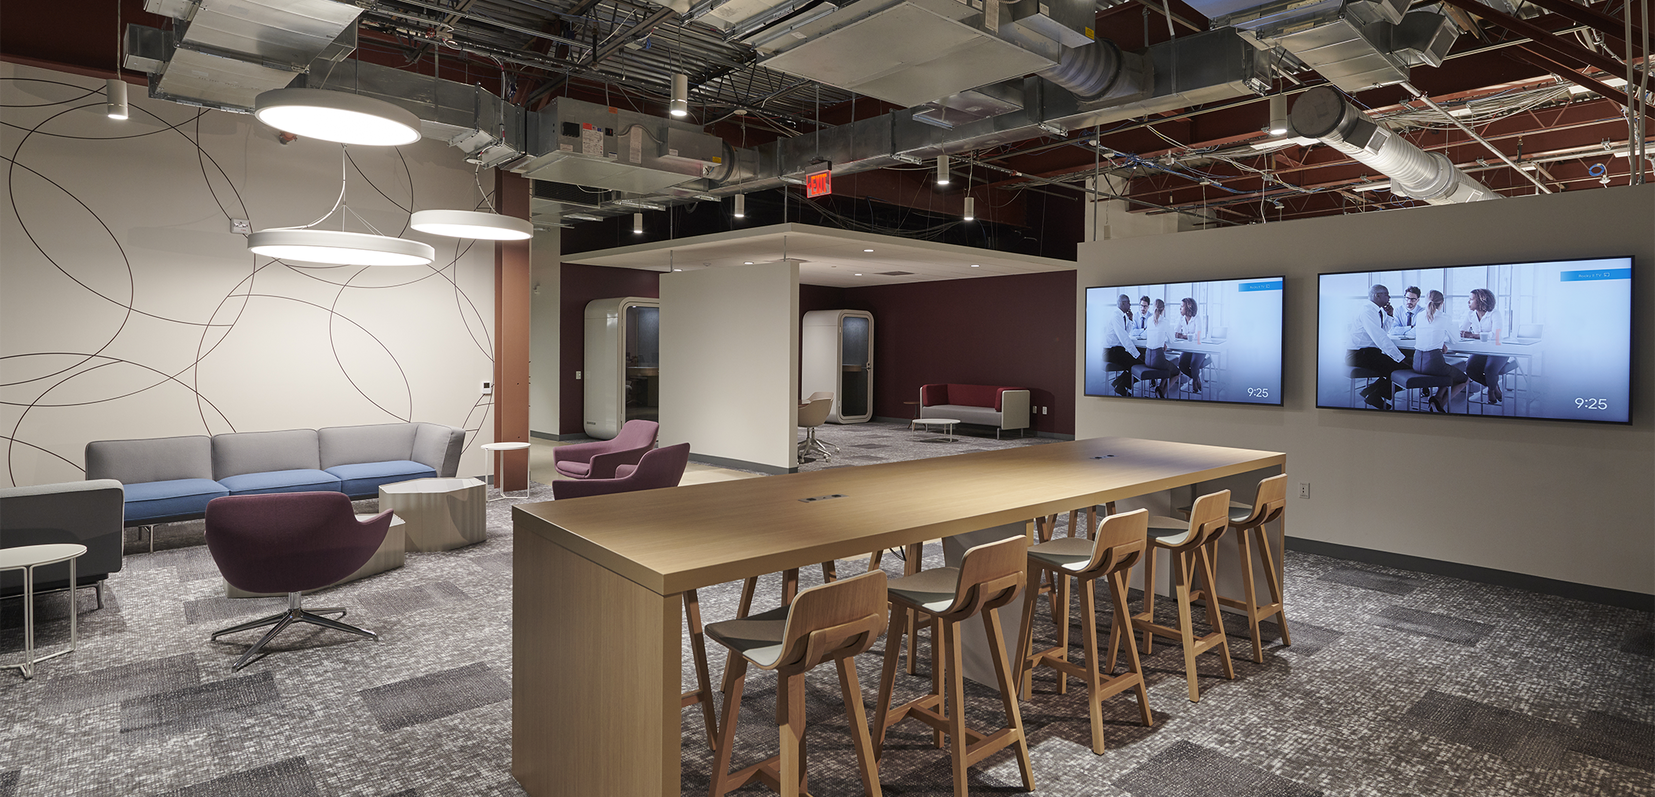 The interior space of Signant Health Headquarters featuring a long table with chairs, tv screens, and a sitting area.